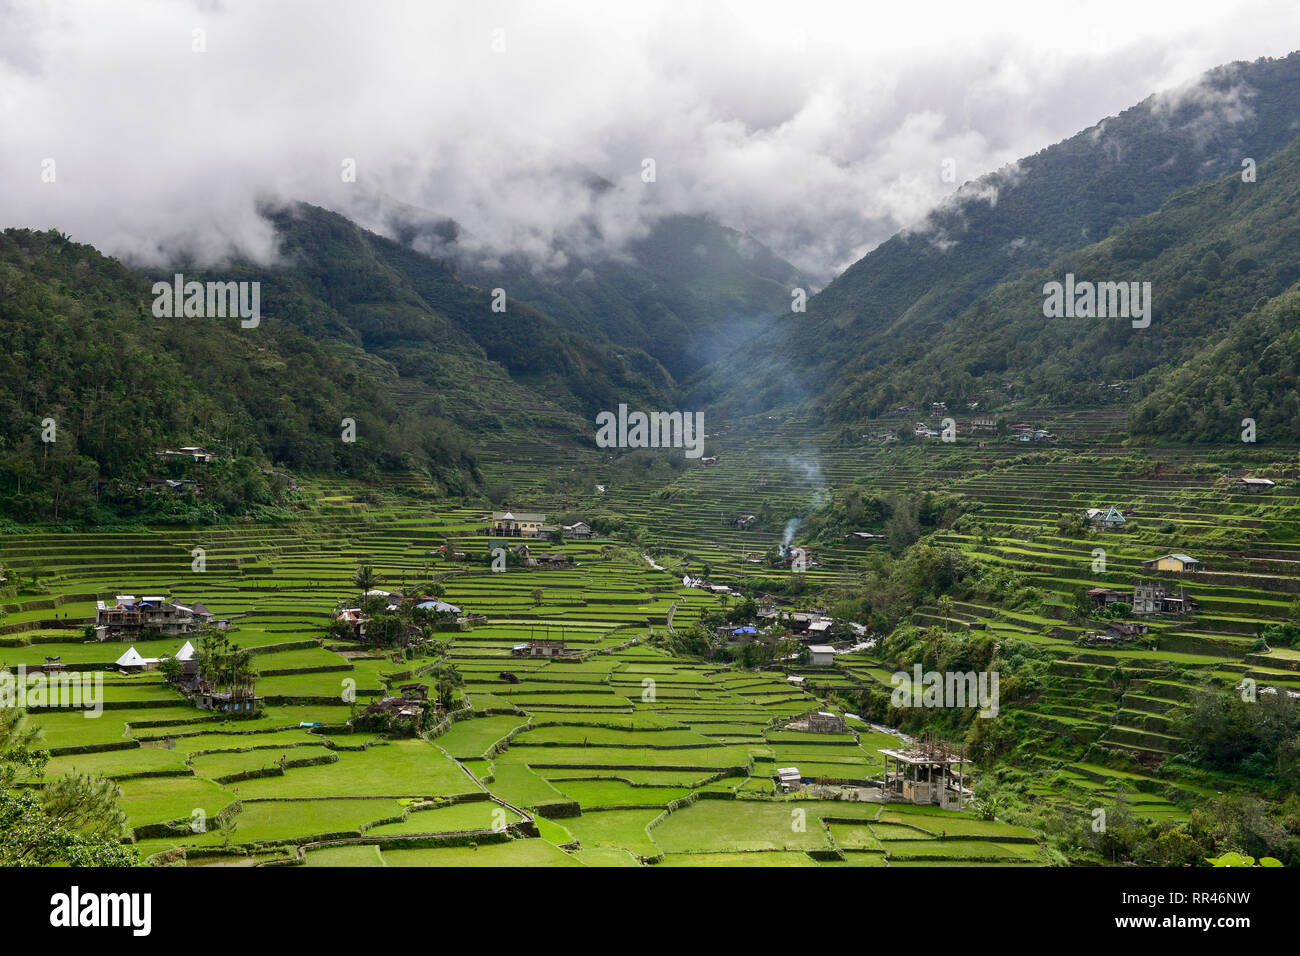 PHILIPPINES, Ifugao Province, Cordilleras, Banaue, Hunduan, rice farming on Hapao rice terraces in mountains, green paddy fields and Hapao church in front of mountains with clouds Stock Photo